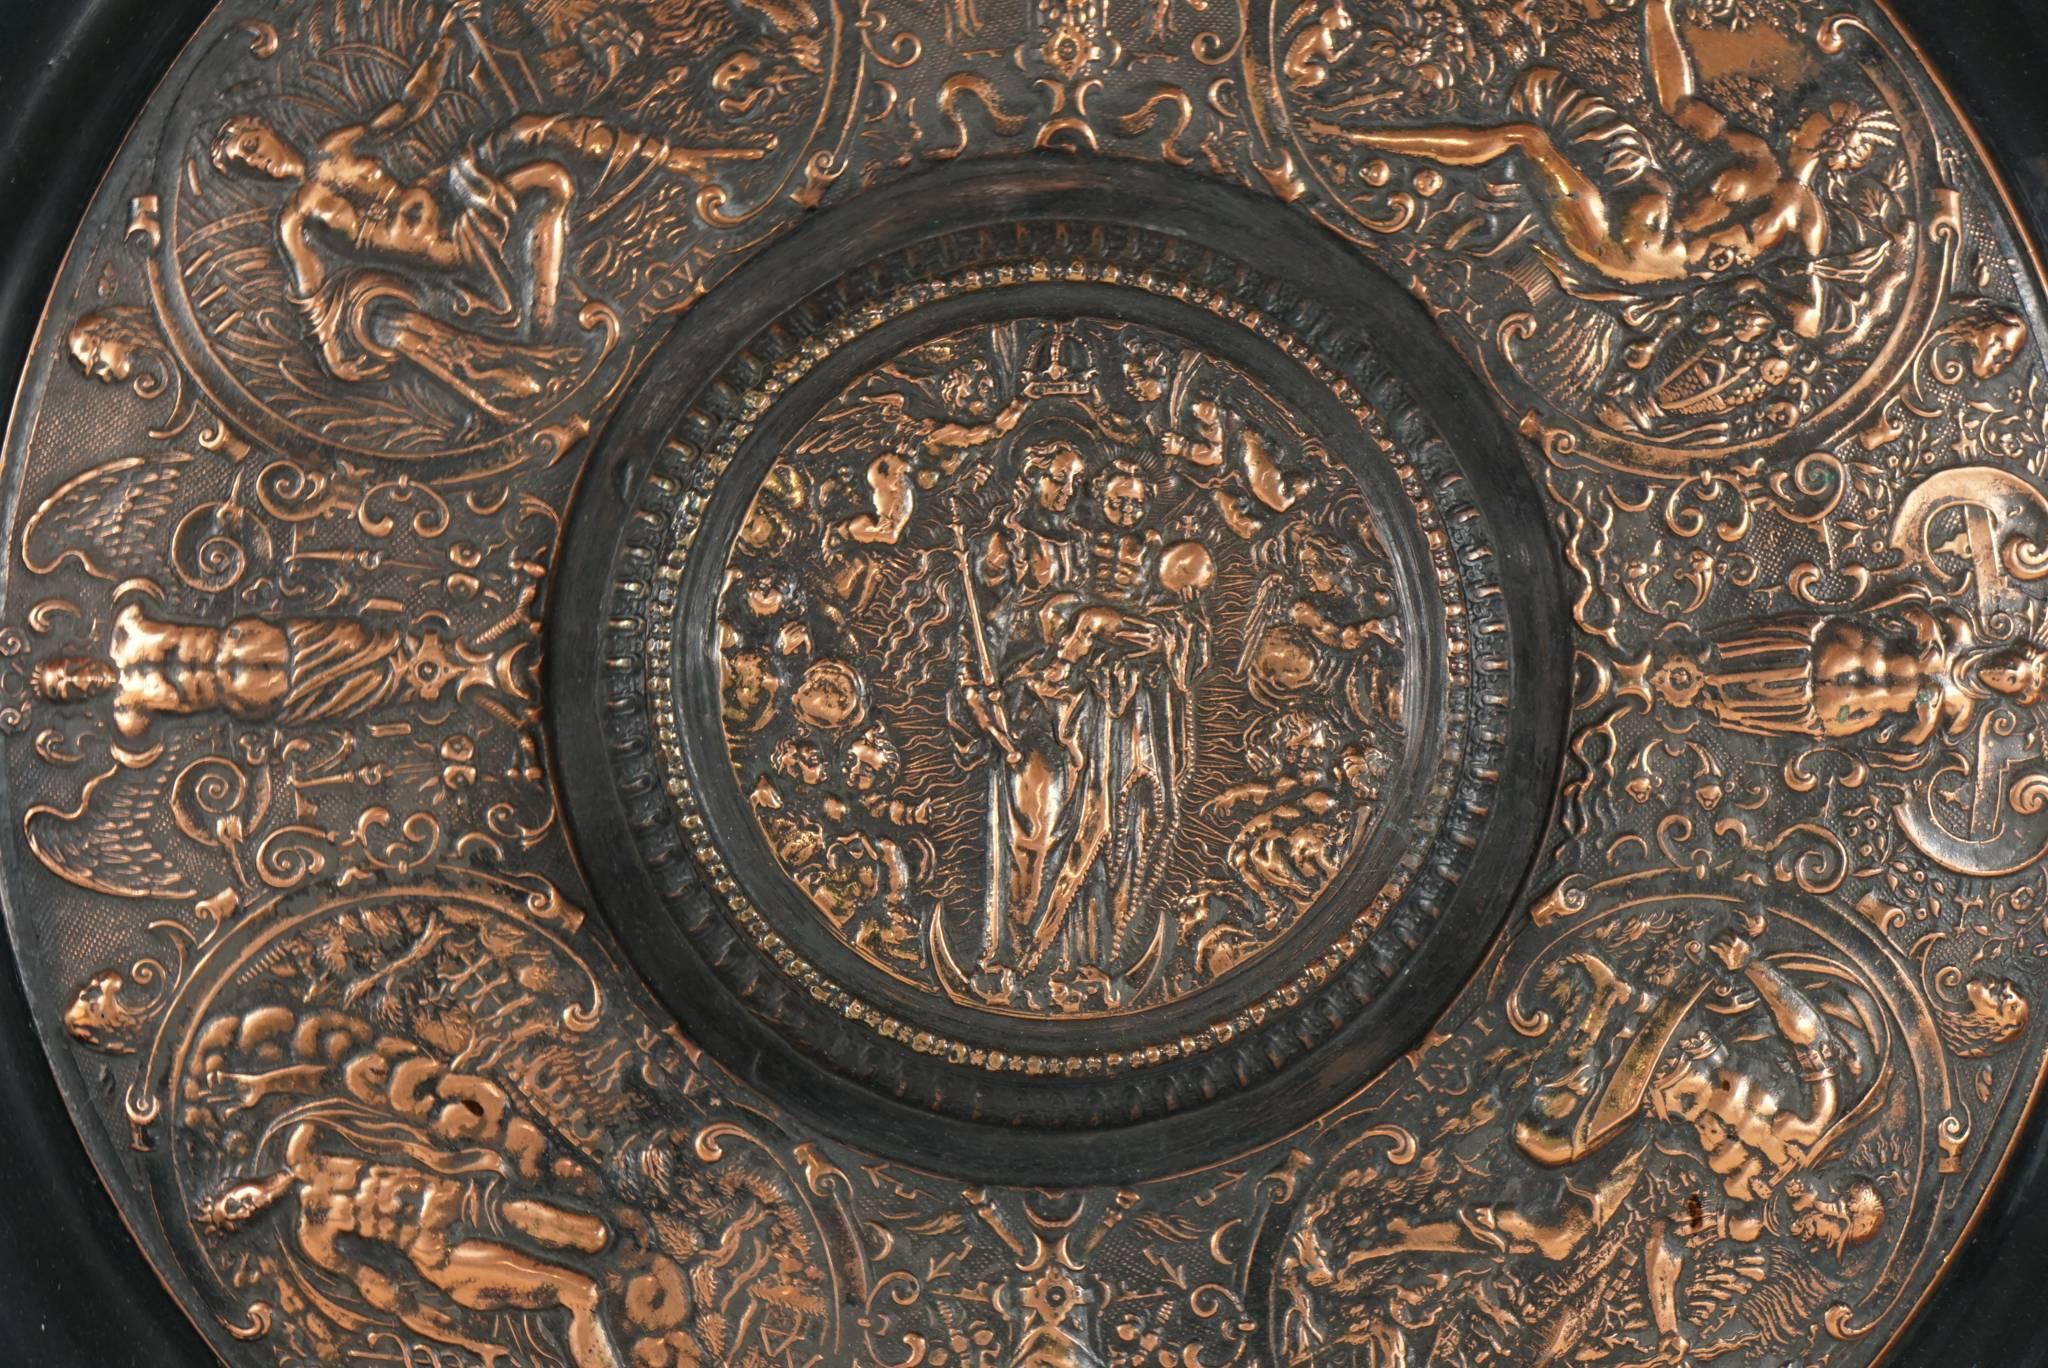 This charger made as an intentional remake of a famous object is fully embossed on the back as such and contains the maker's name. The charger contains many different scenes from antiquity but is centered with a scene from the life of Christ with